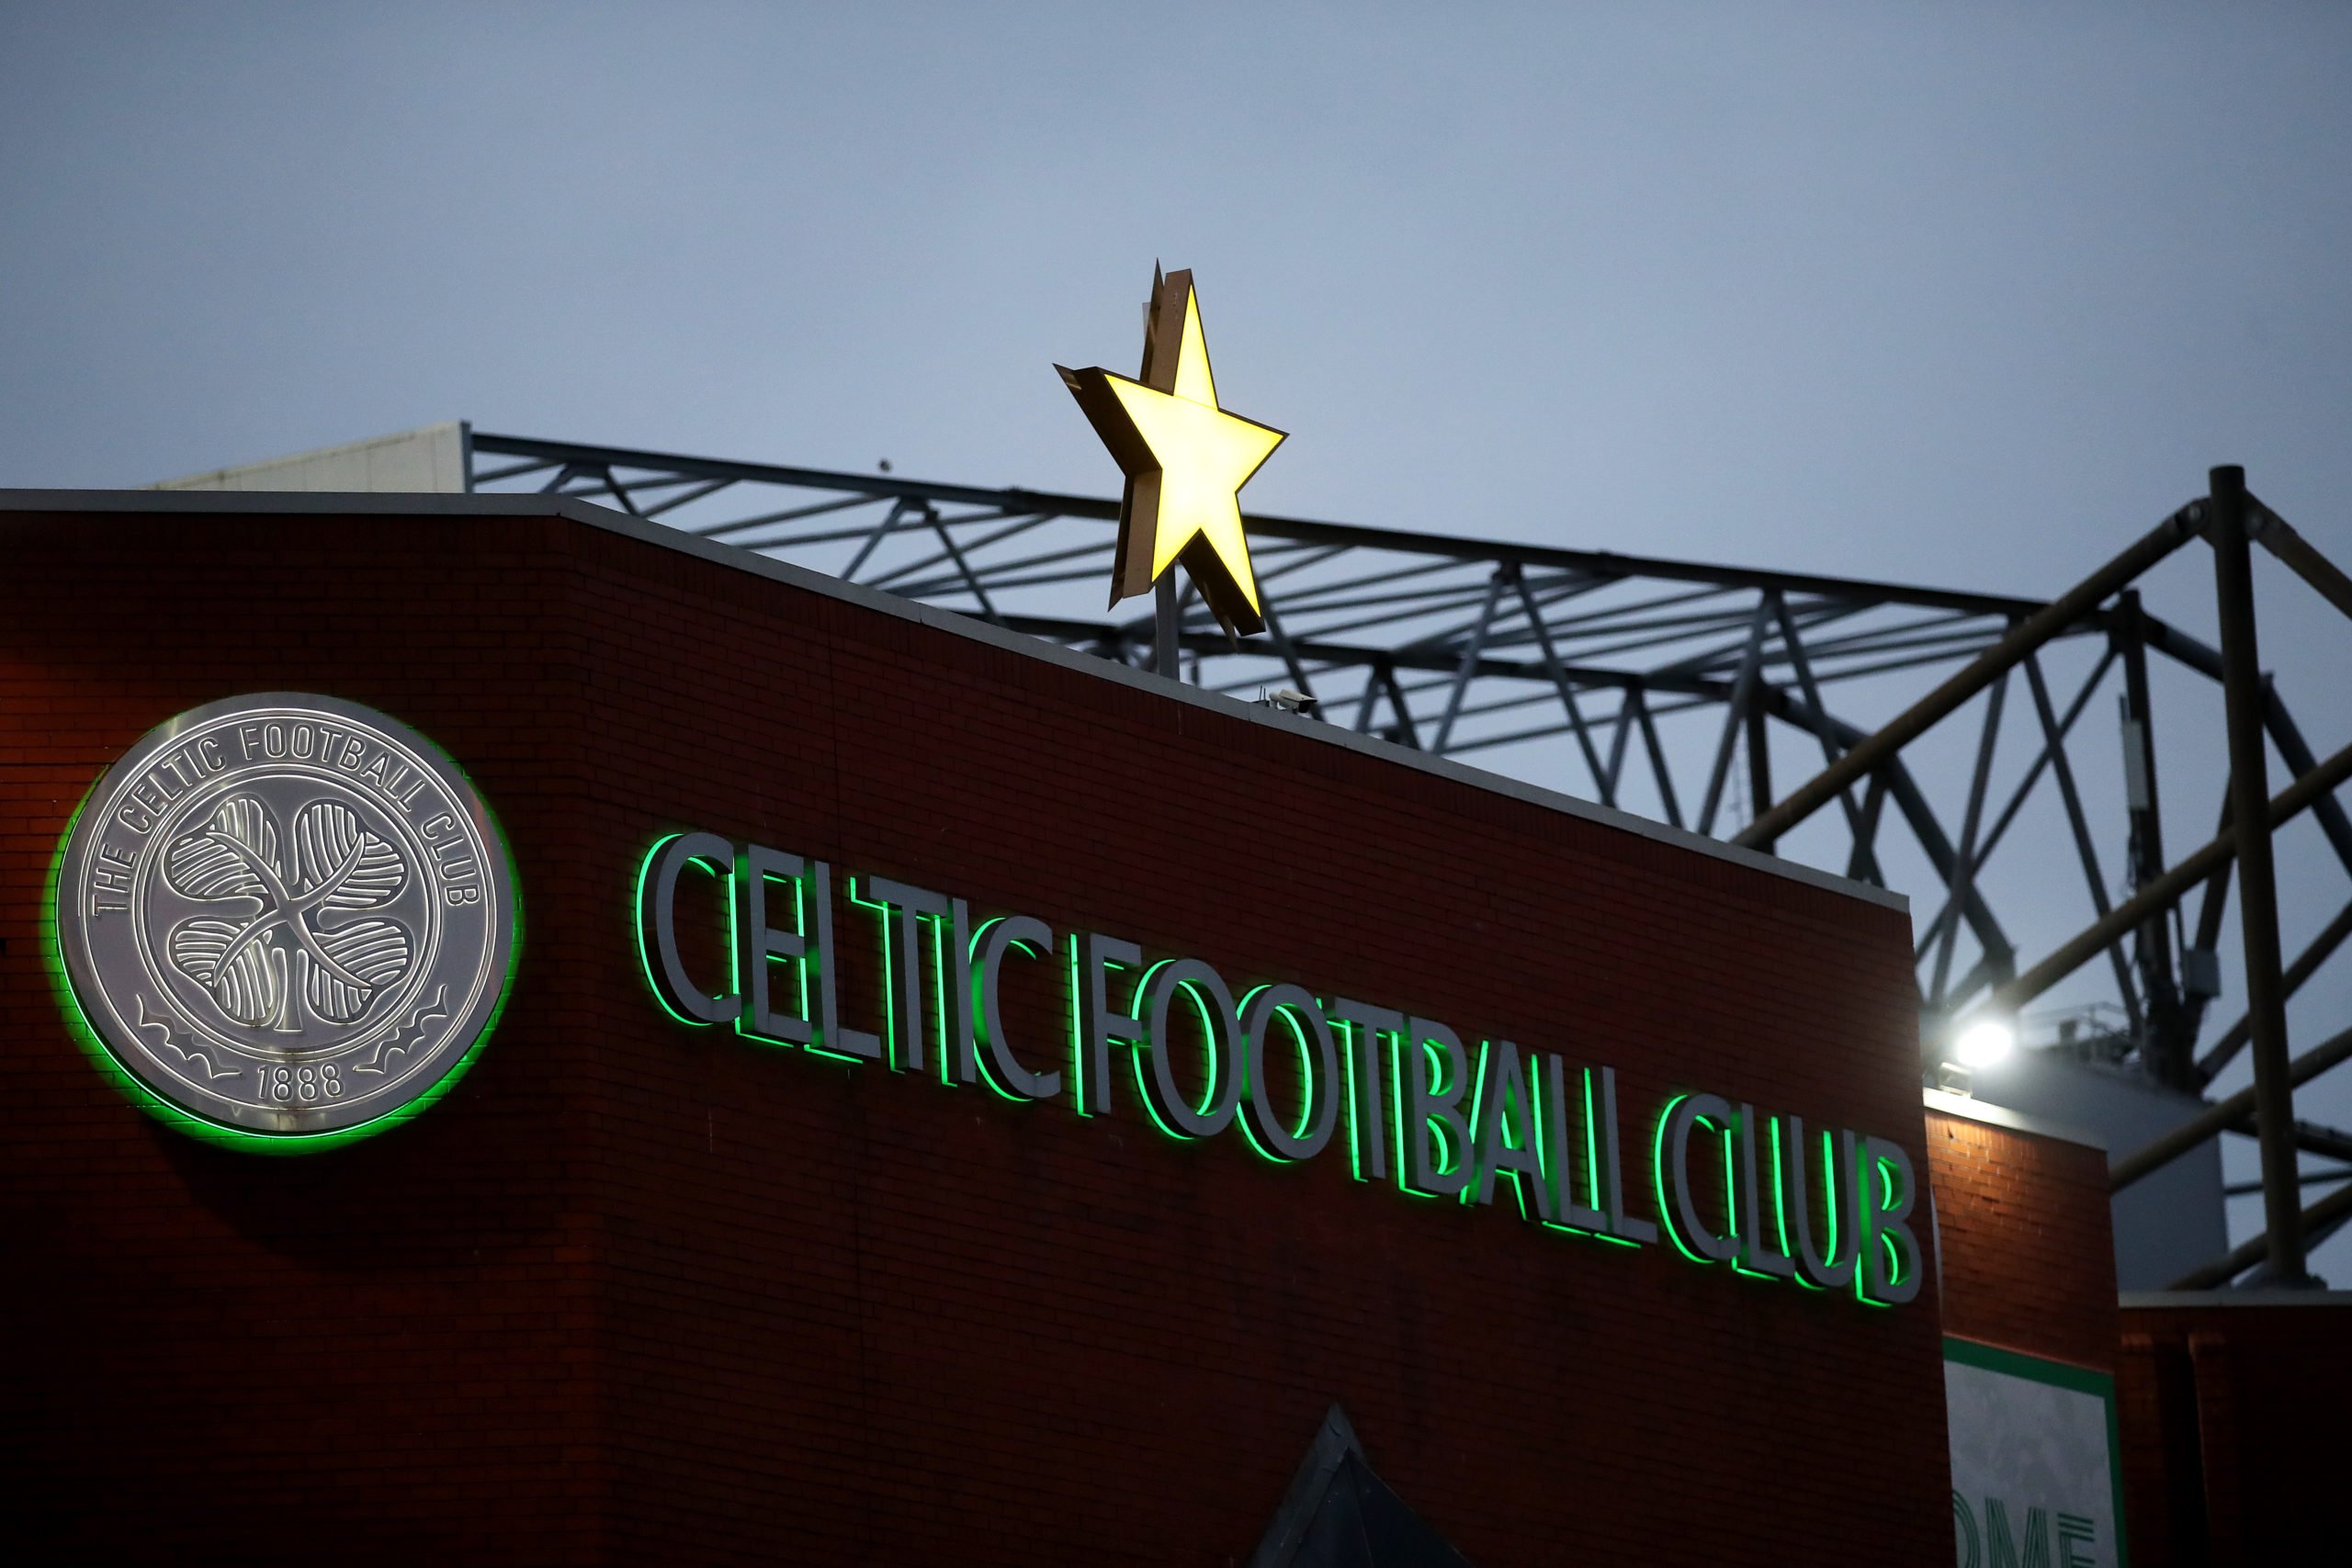 Neil Lennon's full comments on today's Celtic meeting are mind-boggling